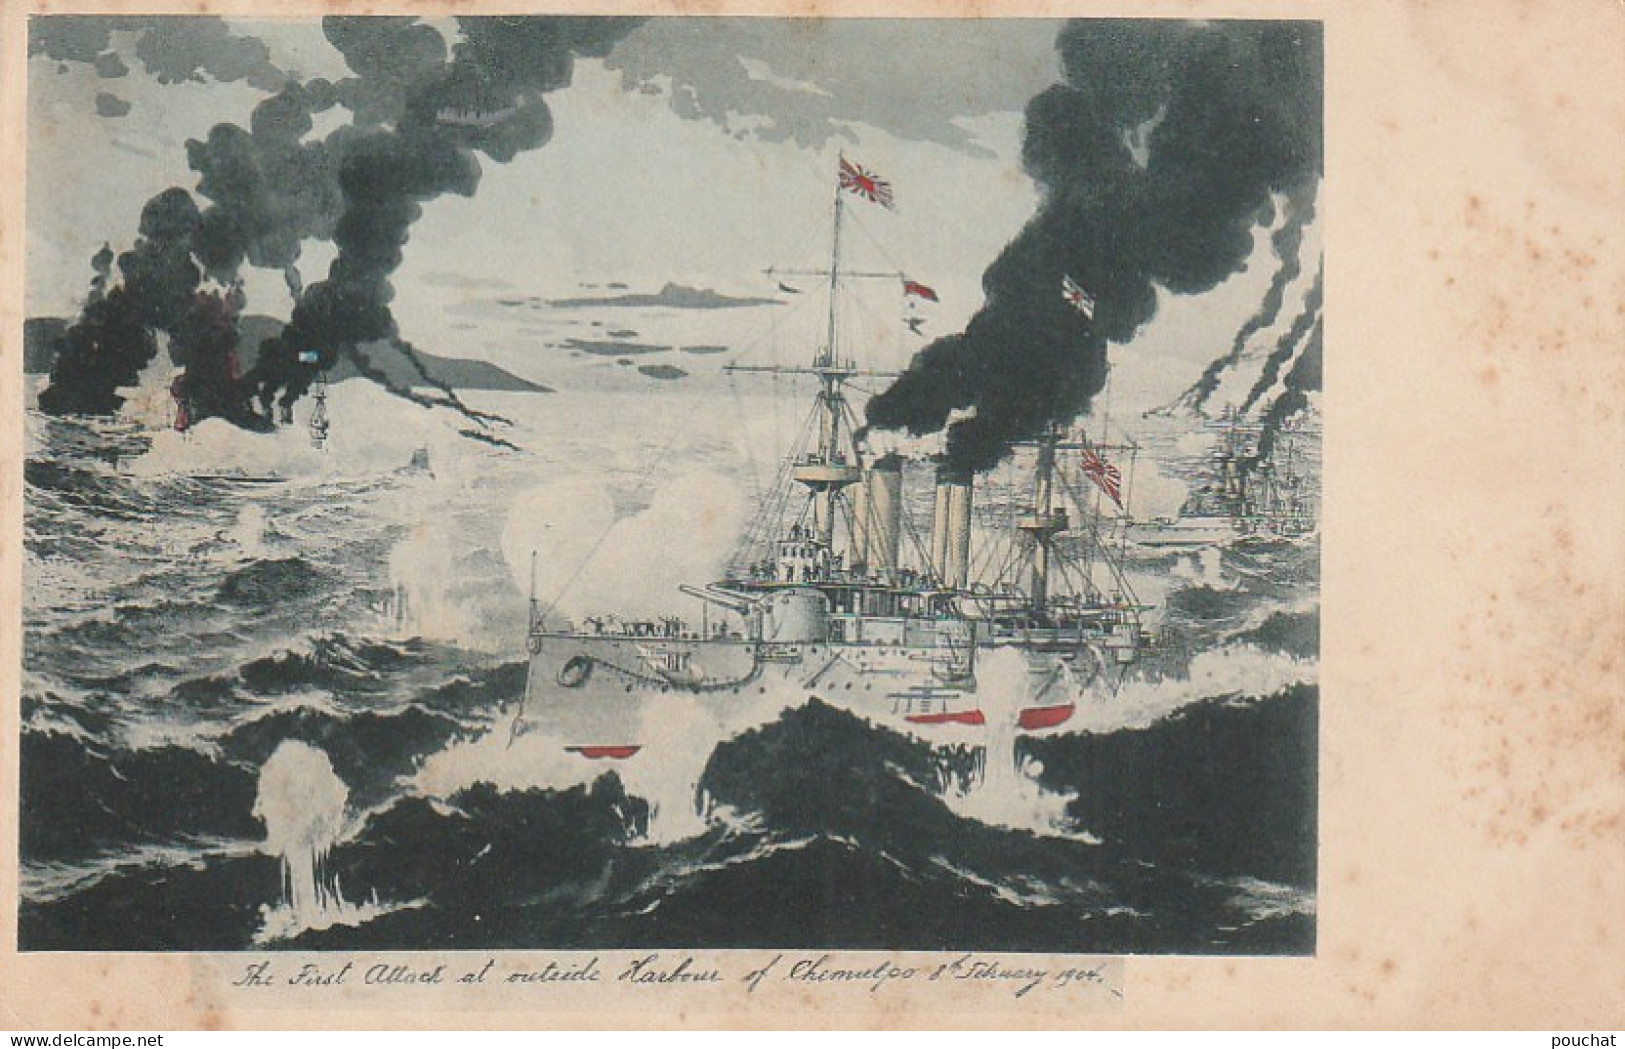 VE 24- THE FIRST ATTACK AT OUTSIDE HARBOUR OF CHEMULPO ( FEVRIER 1904) - ATTAQUE  PORT DE CHEMULPO - ILLUSTRATEUR  - Other Wars